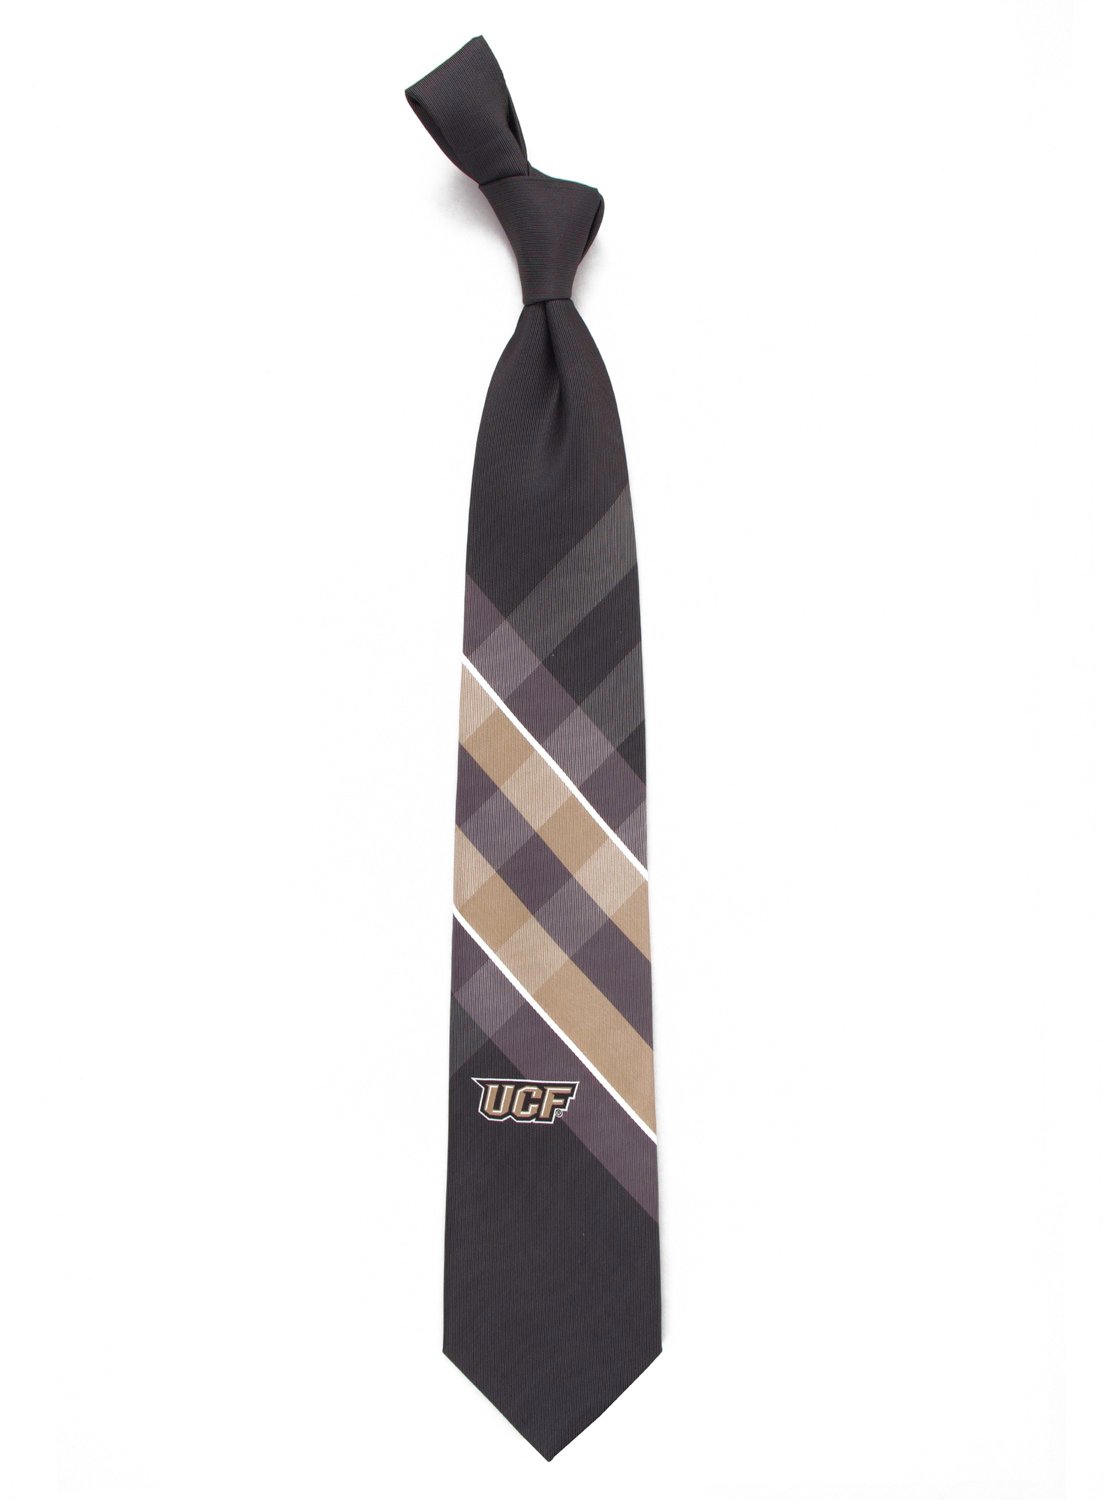 Eagles Wings University of Central Florida Grid Tie